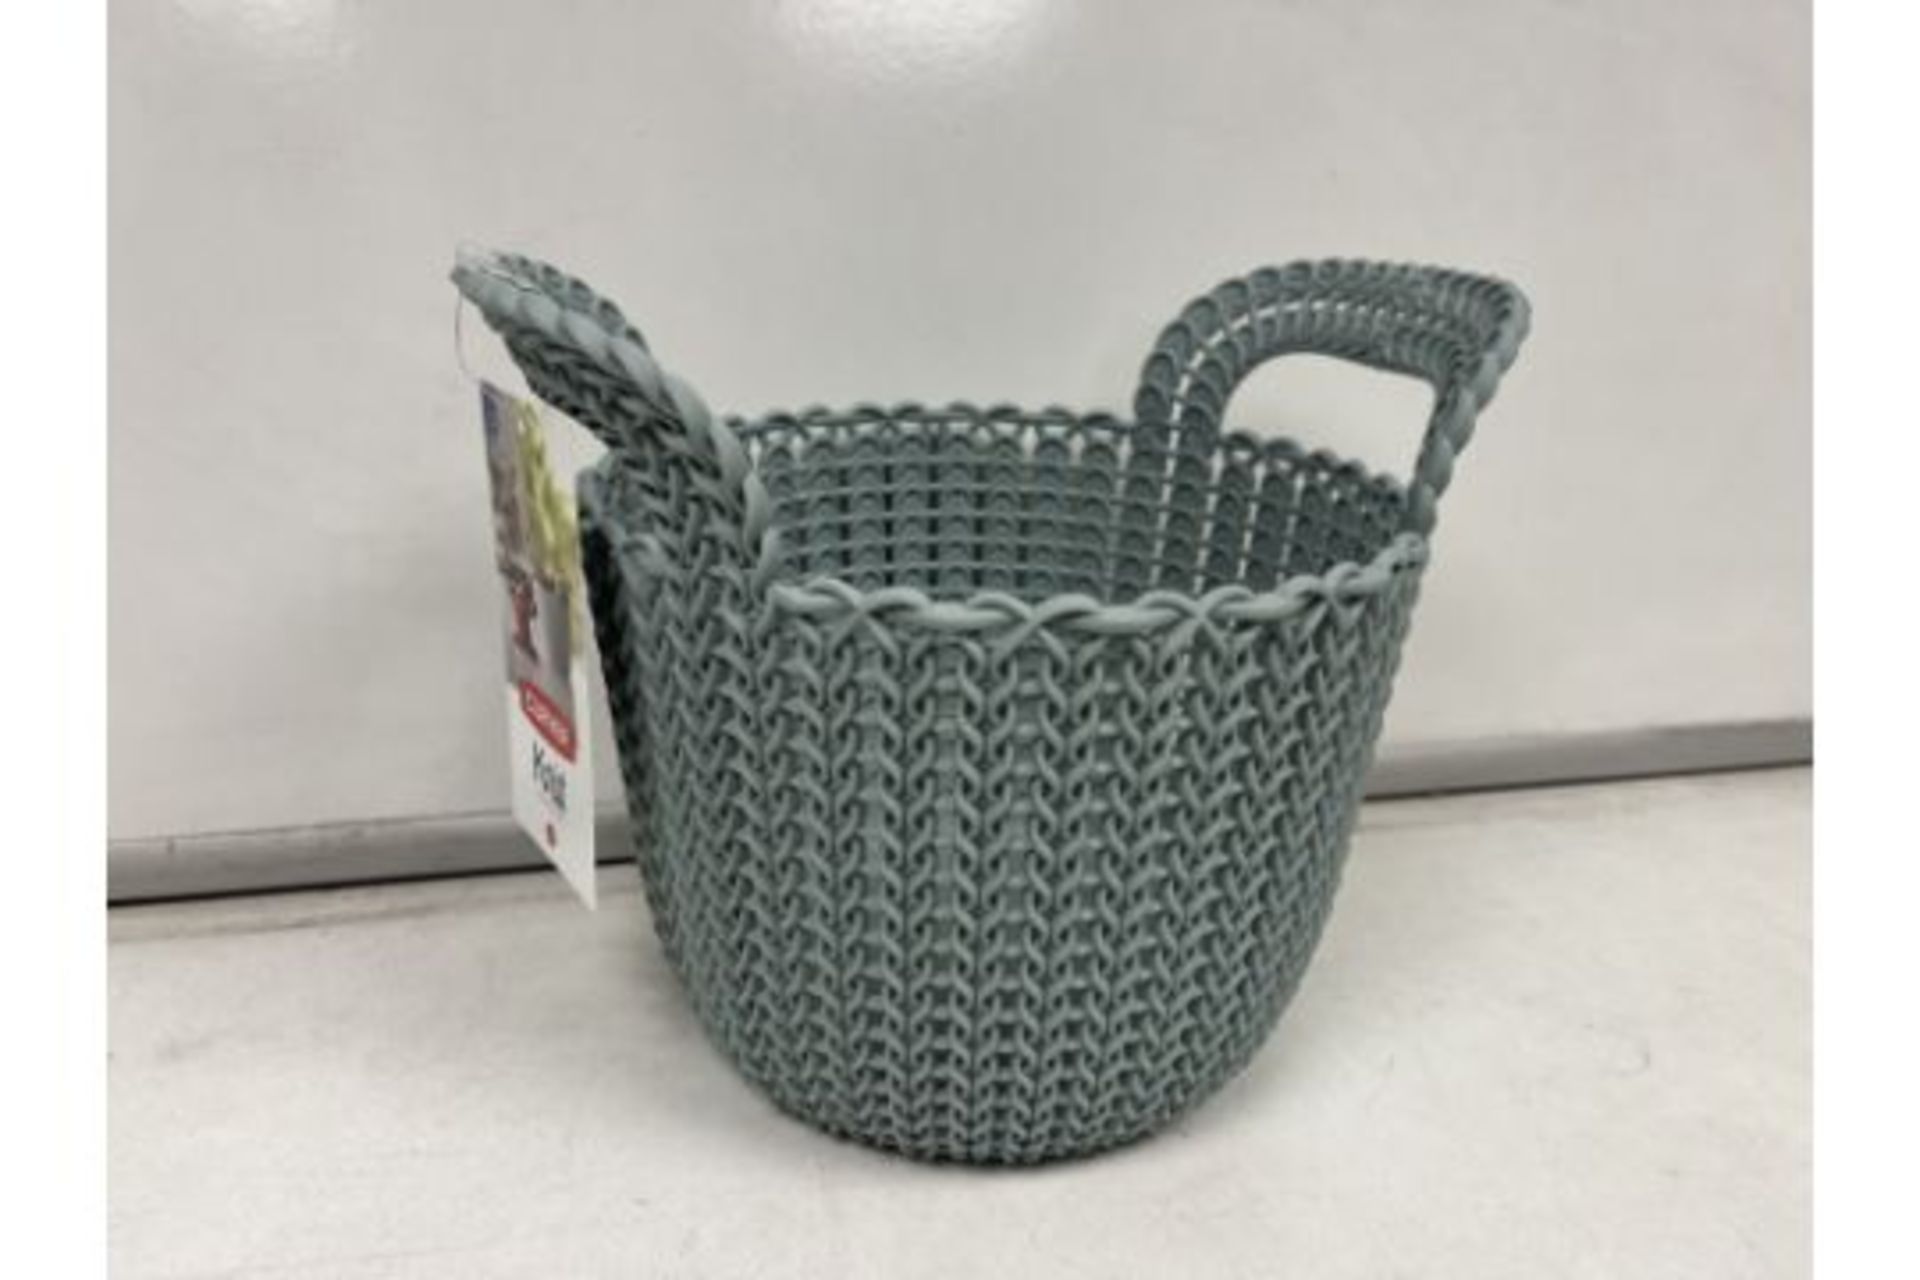 30 X NEW PACKAGED CURVER 226386 Decorative Basket Round Knitted Plastic Blue/Grey (226386ROW9)